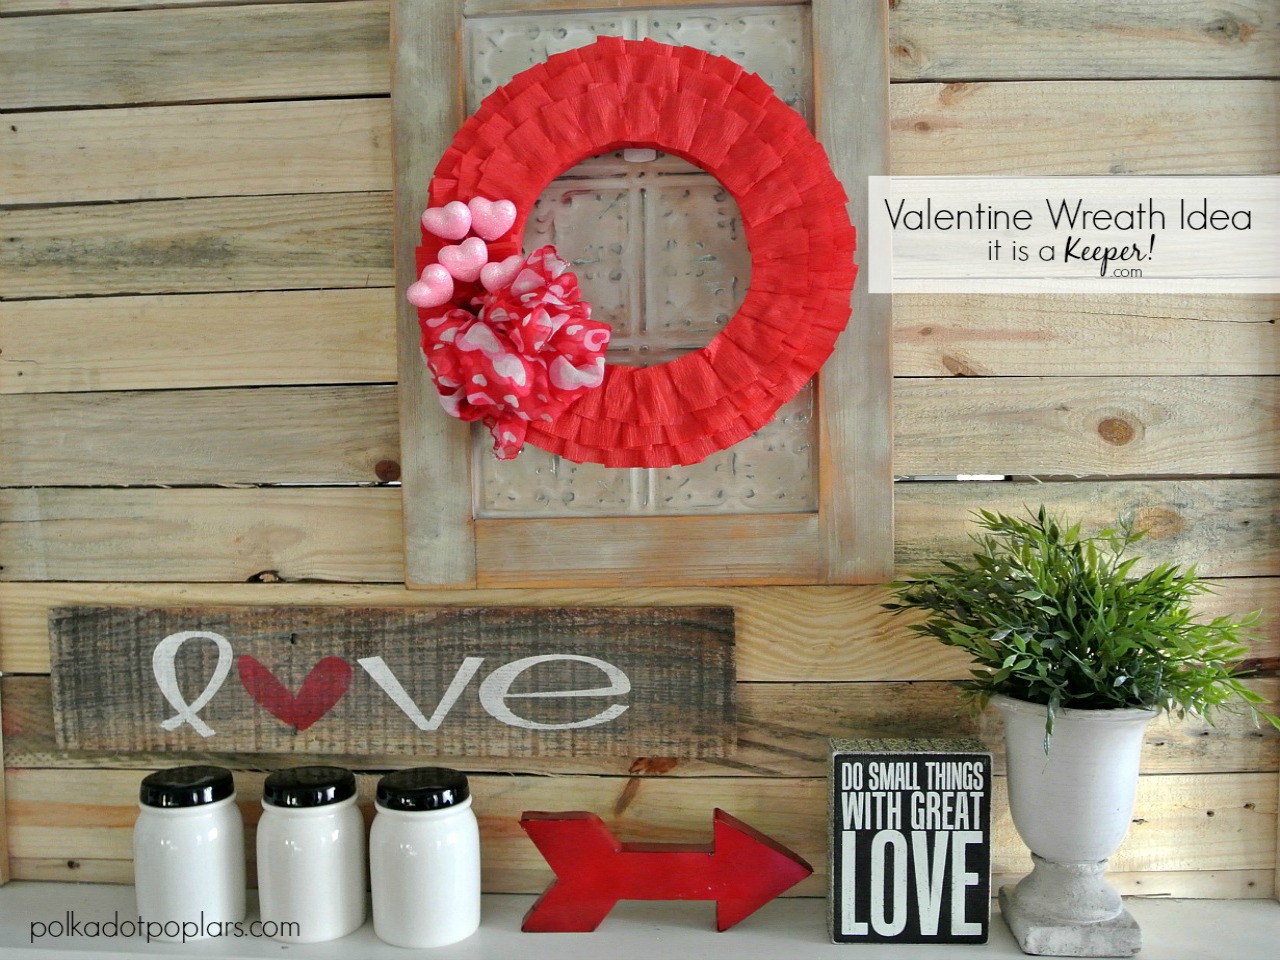 This Valentine wreath is a quick and easy DIY project you can make in under an hour.  